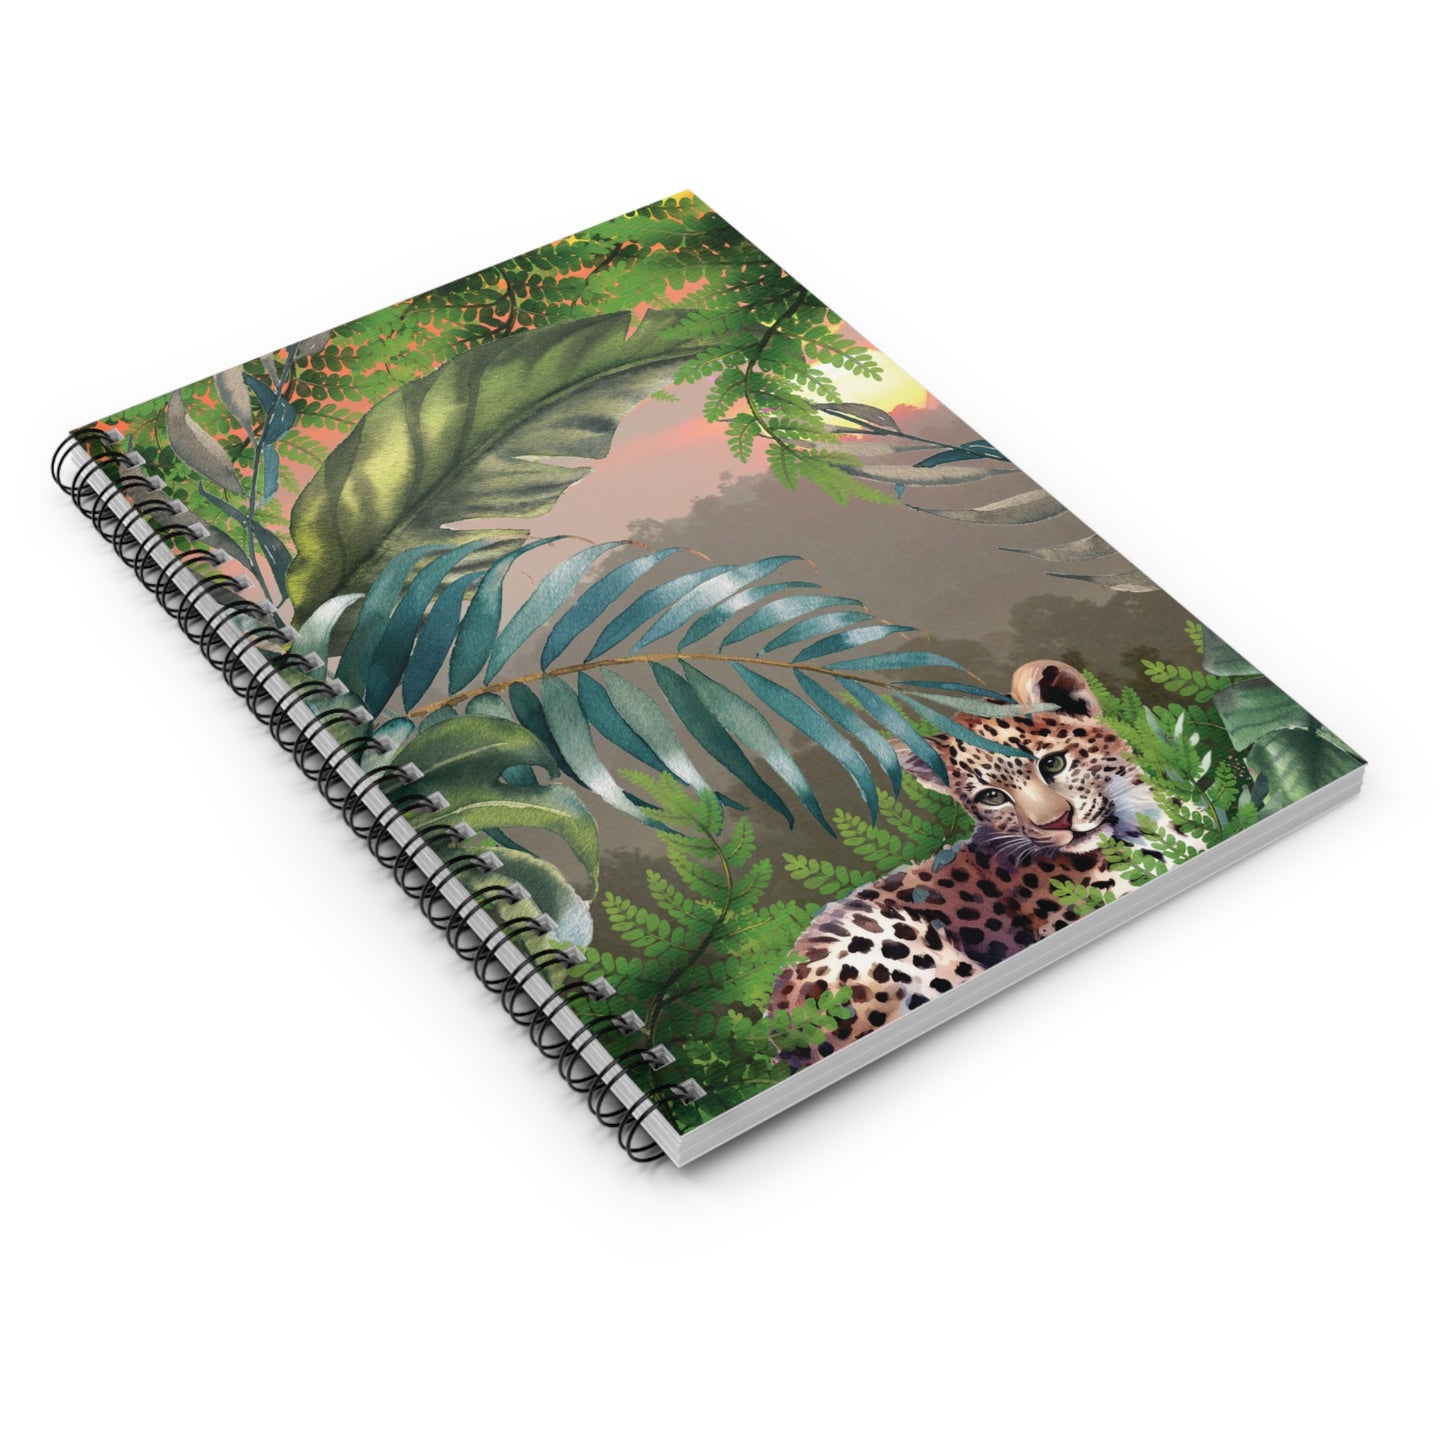 Jungle Tiger Cub: Spiral Notebook - Log Books - Journals - Diaries - and More Custom Printed by TheGlassyLass